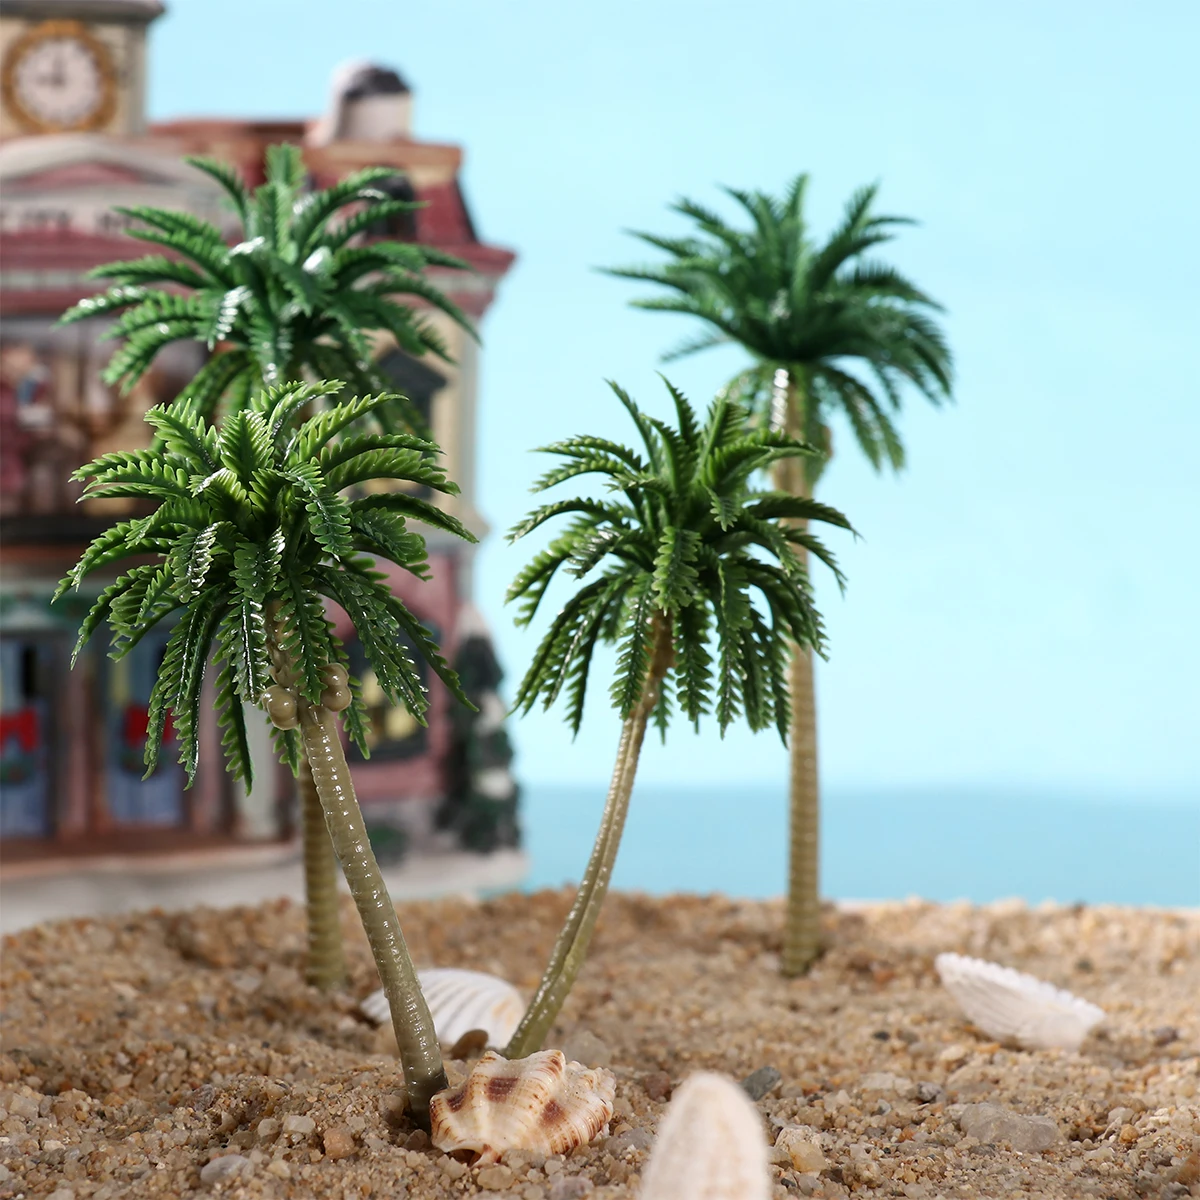 

15pcs Scenery Model Coconut Palm Trees Artificial Plant Simulation Coconut Tree Sand Table Model Tactical Props Home Decor